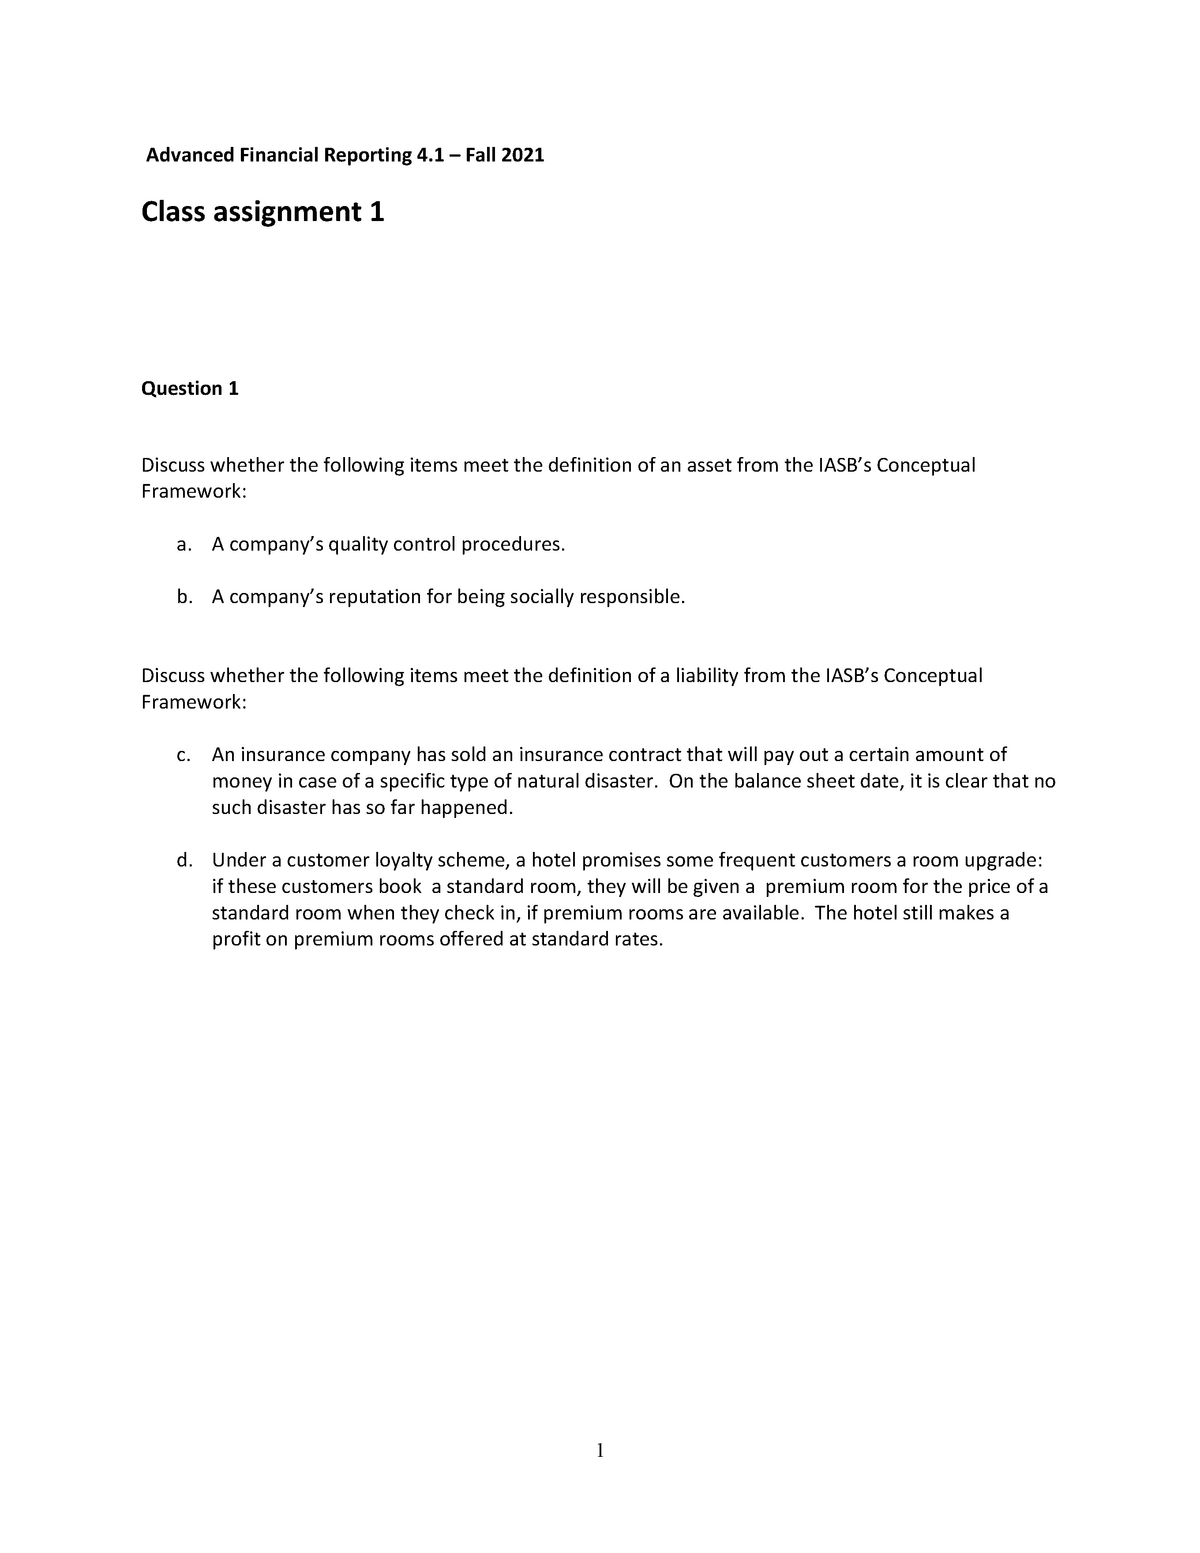 Afr 2021 Class Assignment 1 1 Advanced Financial Reporting 4 Fall